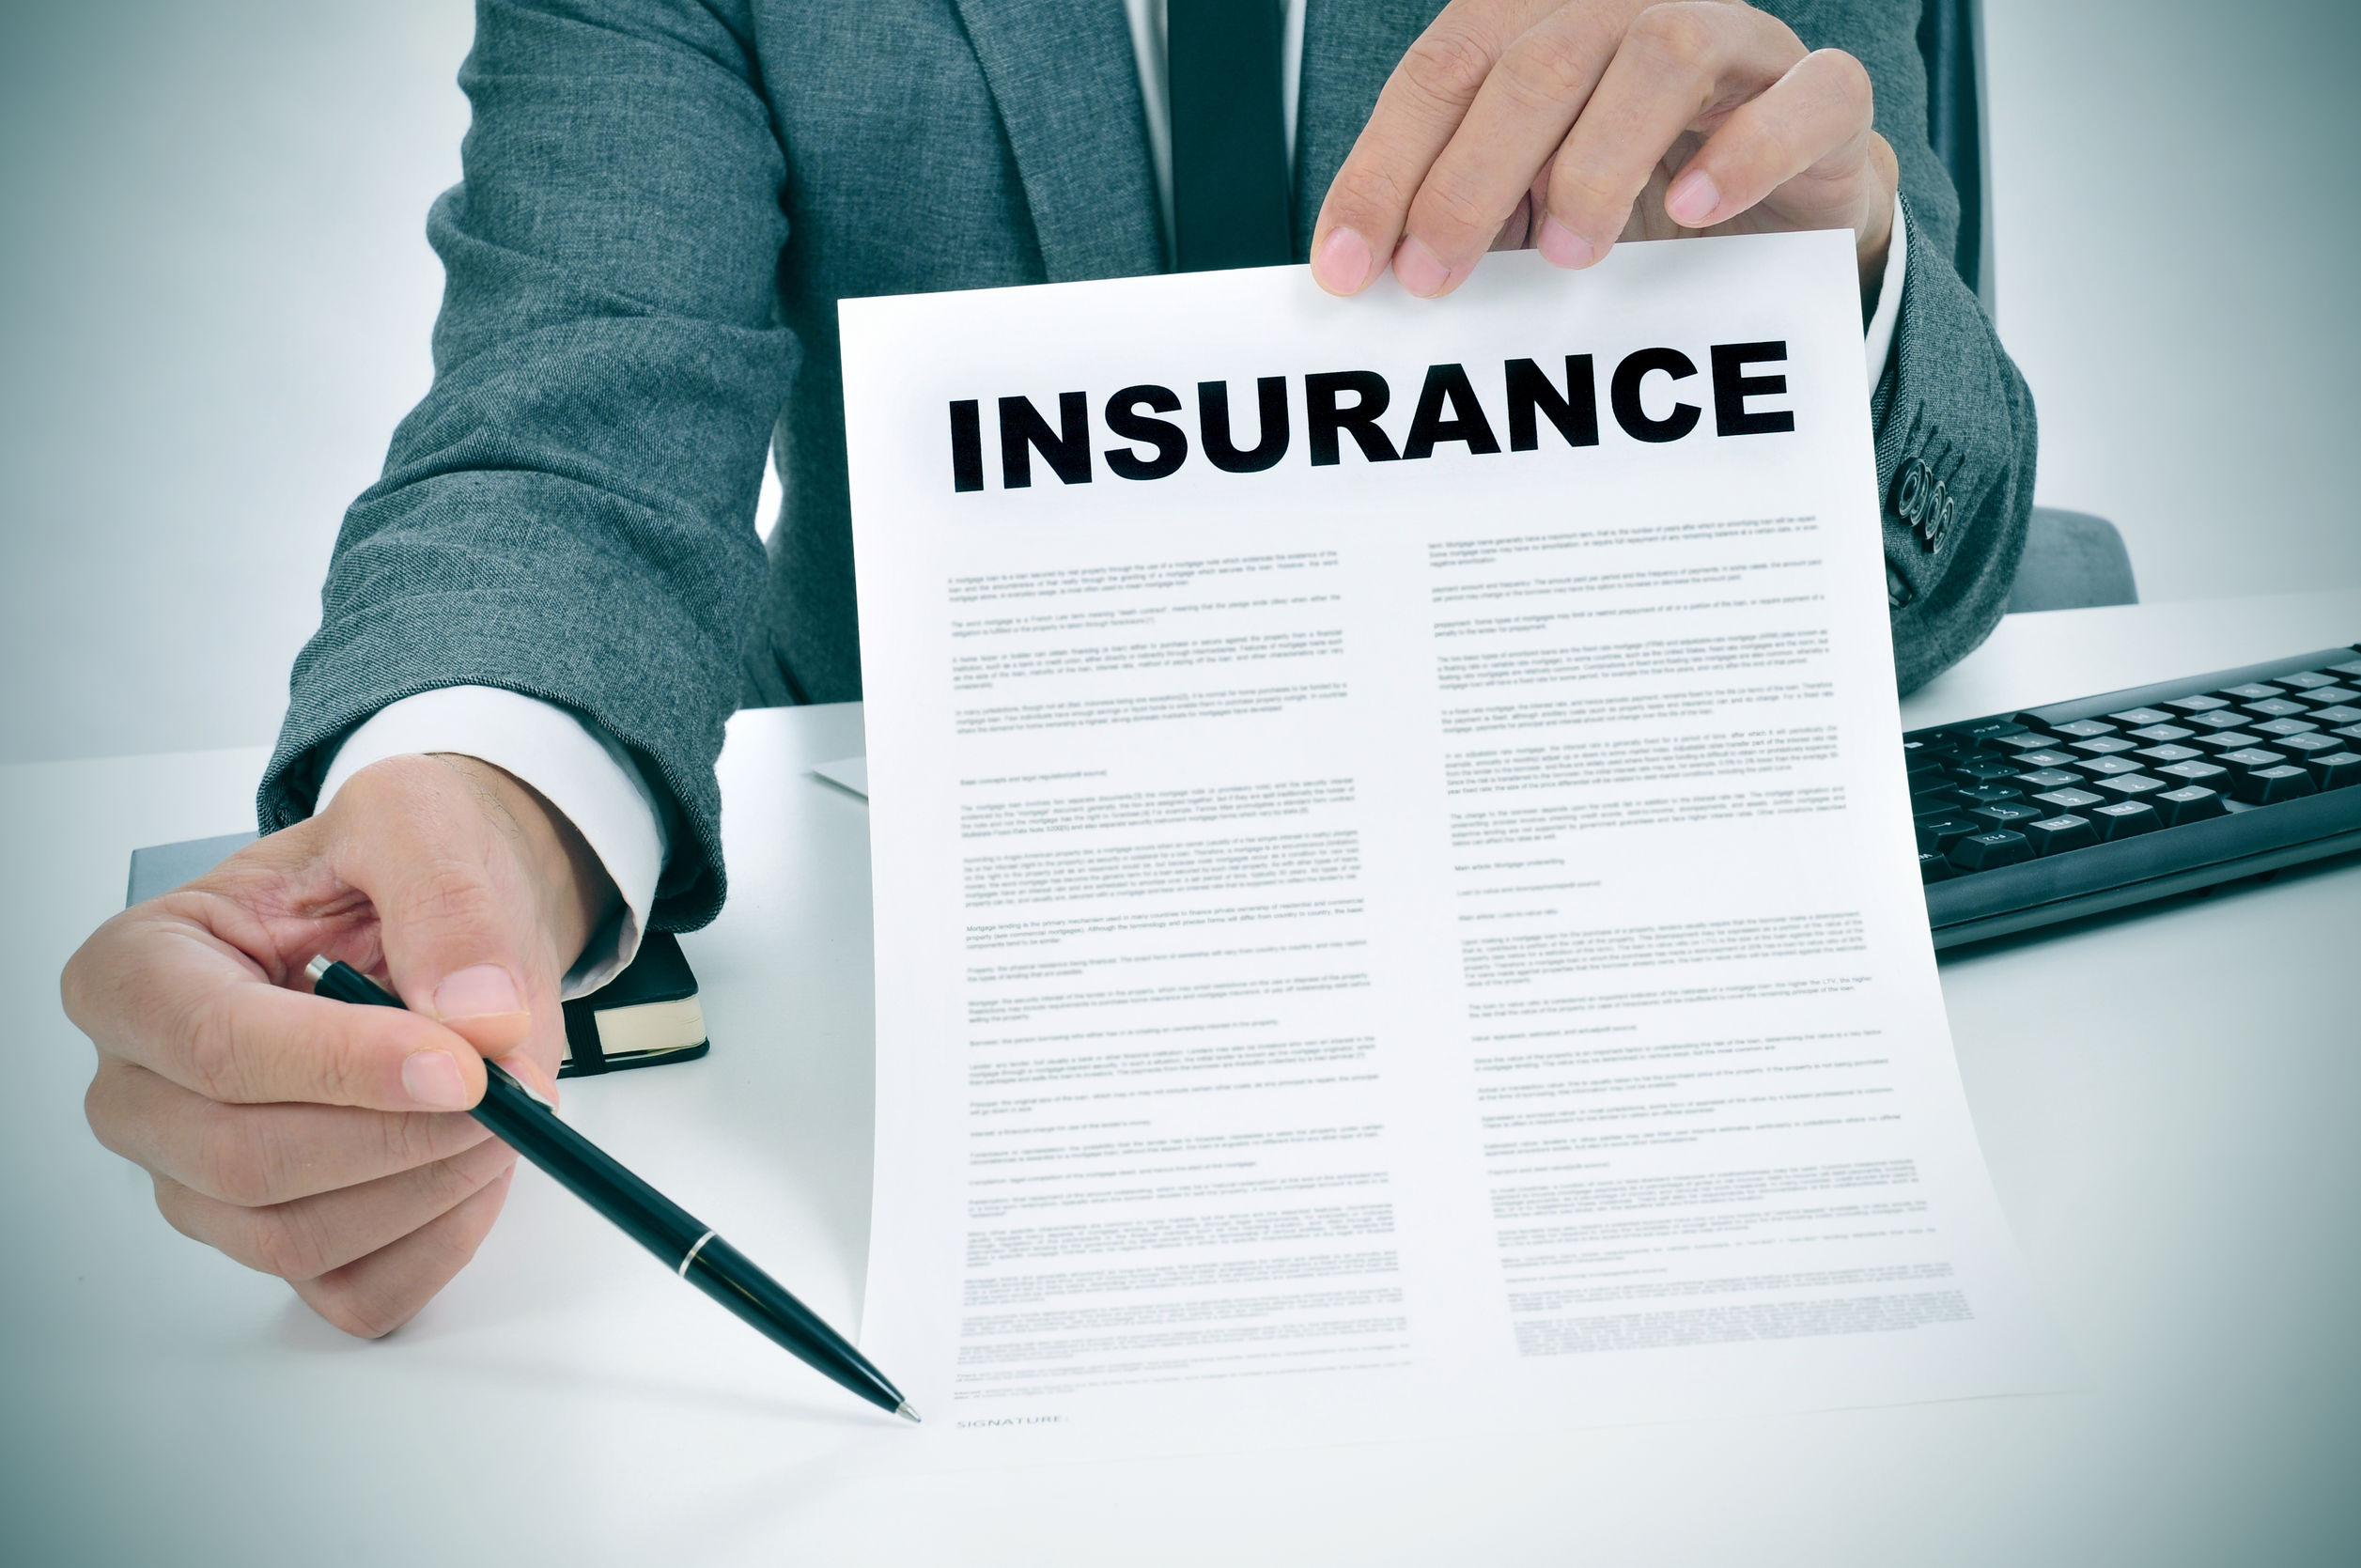 Florida Insurers That Are Known for Bad Faith Practices